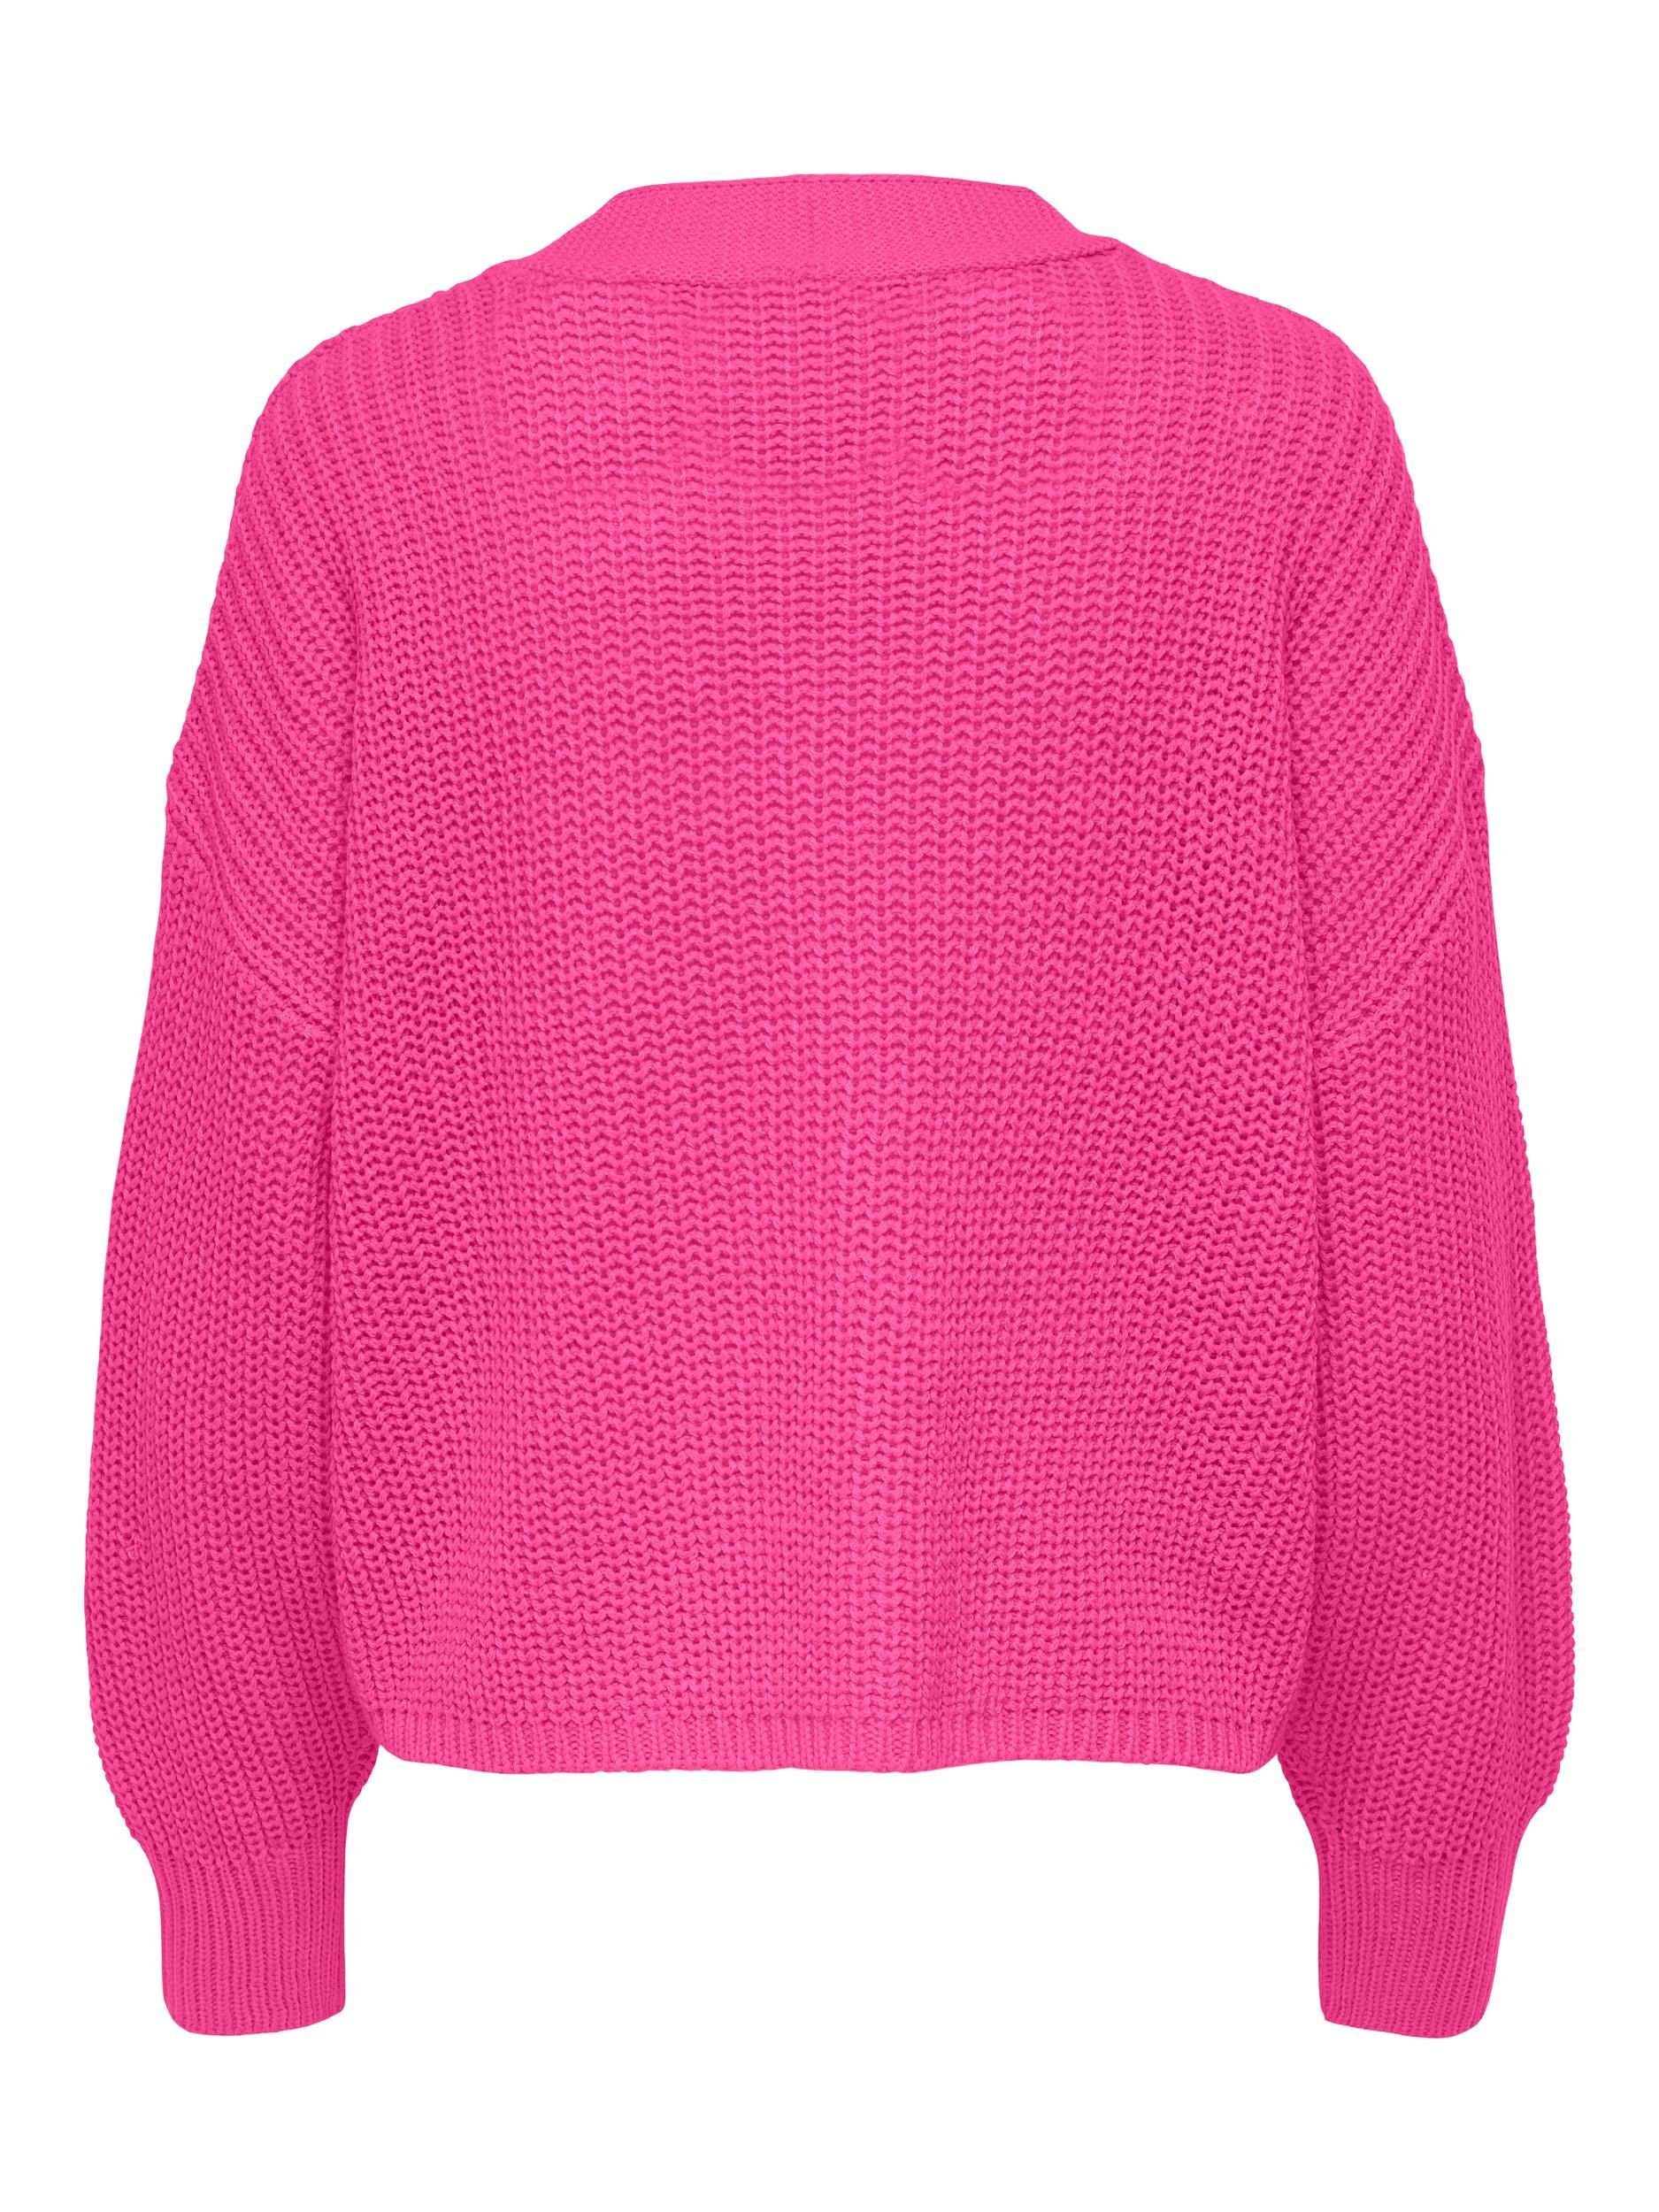 ONLY Raspberry Strickpullover